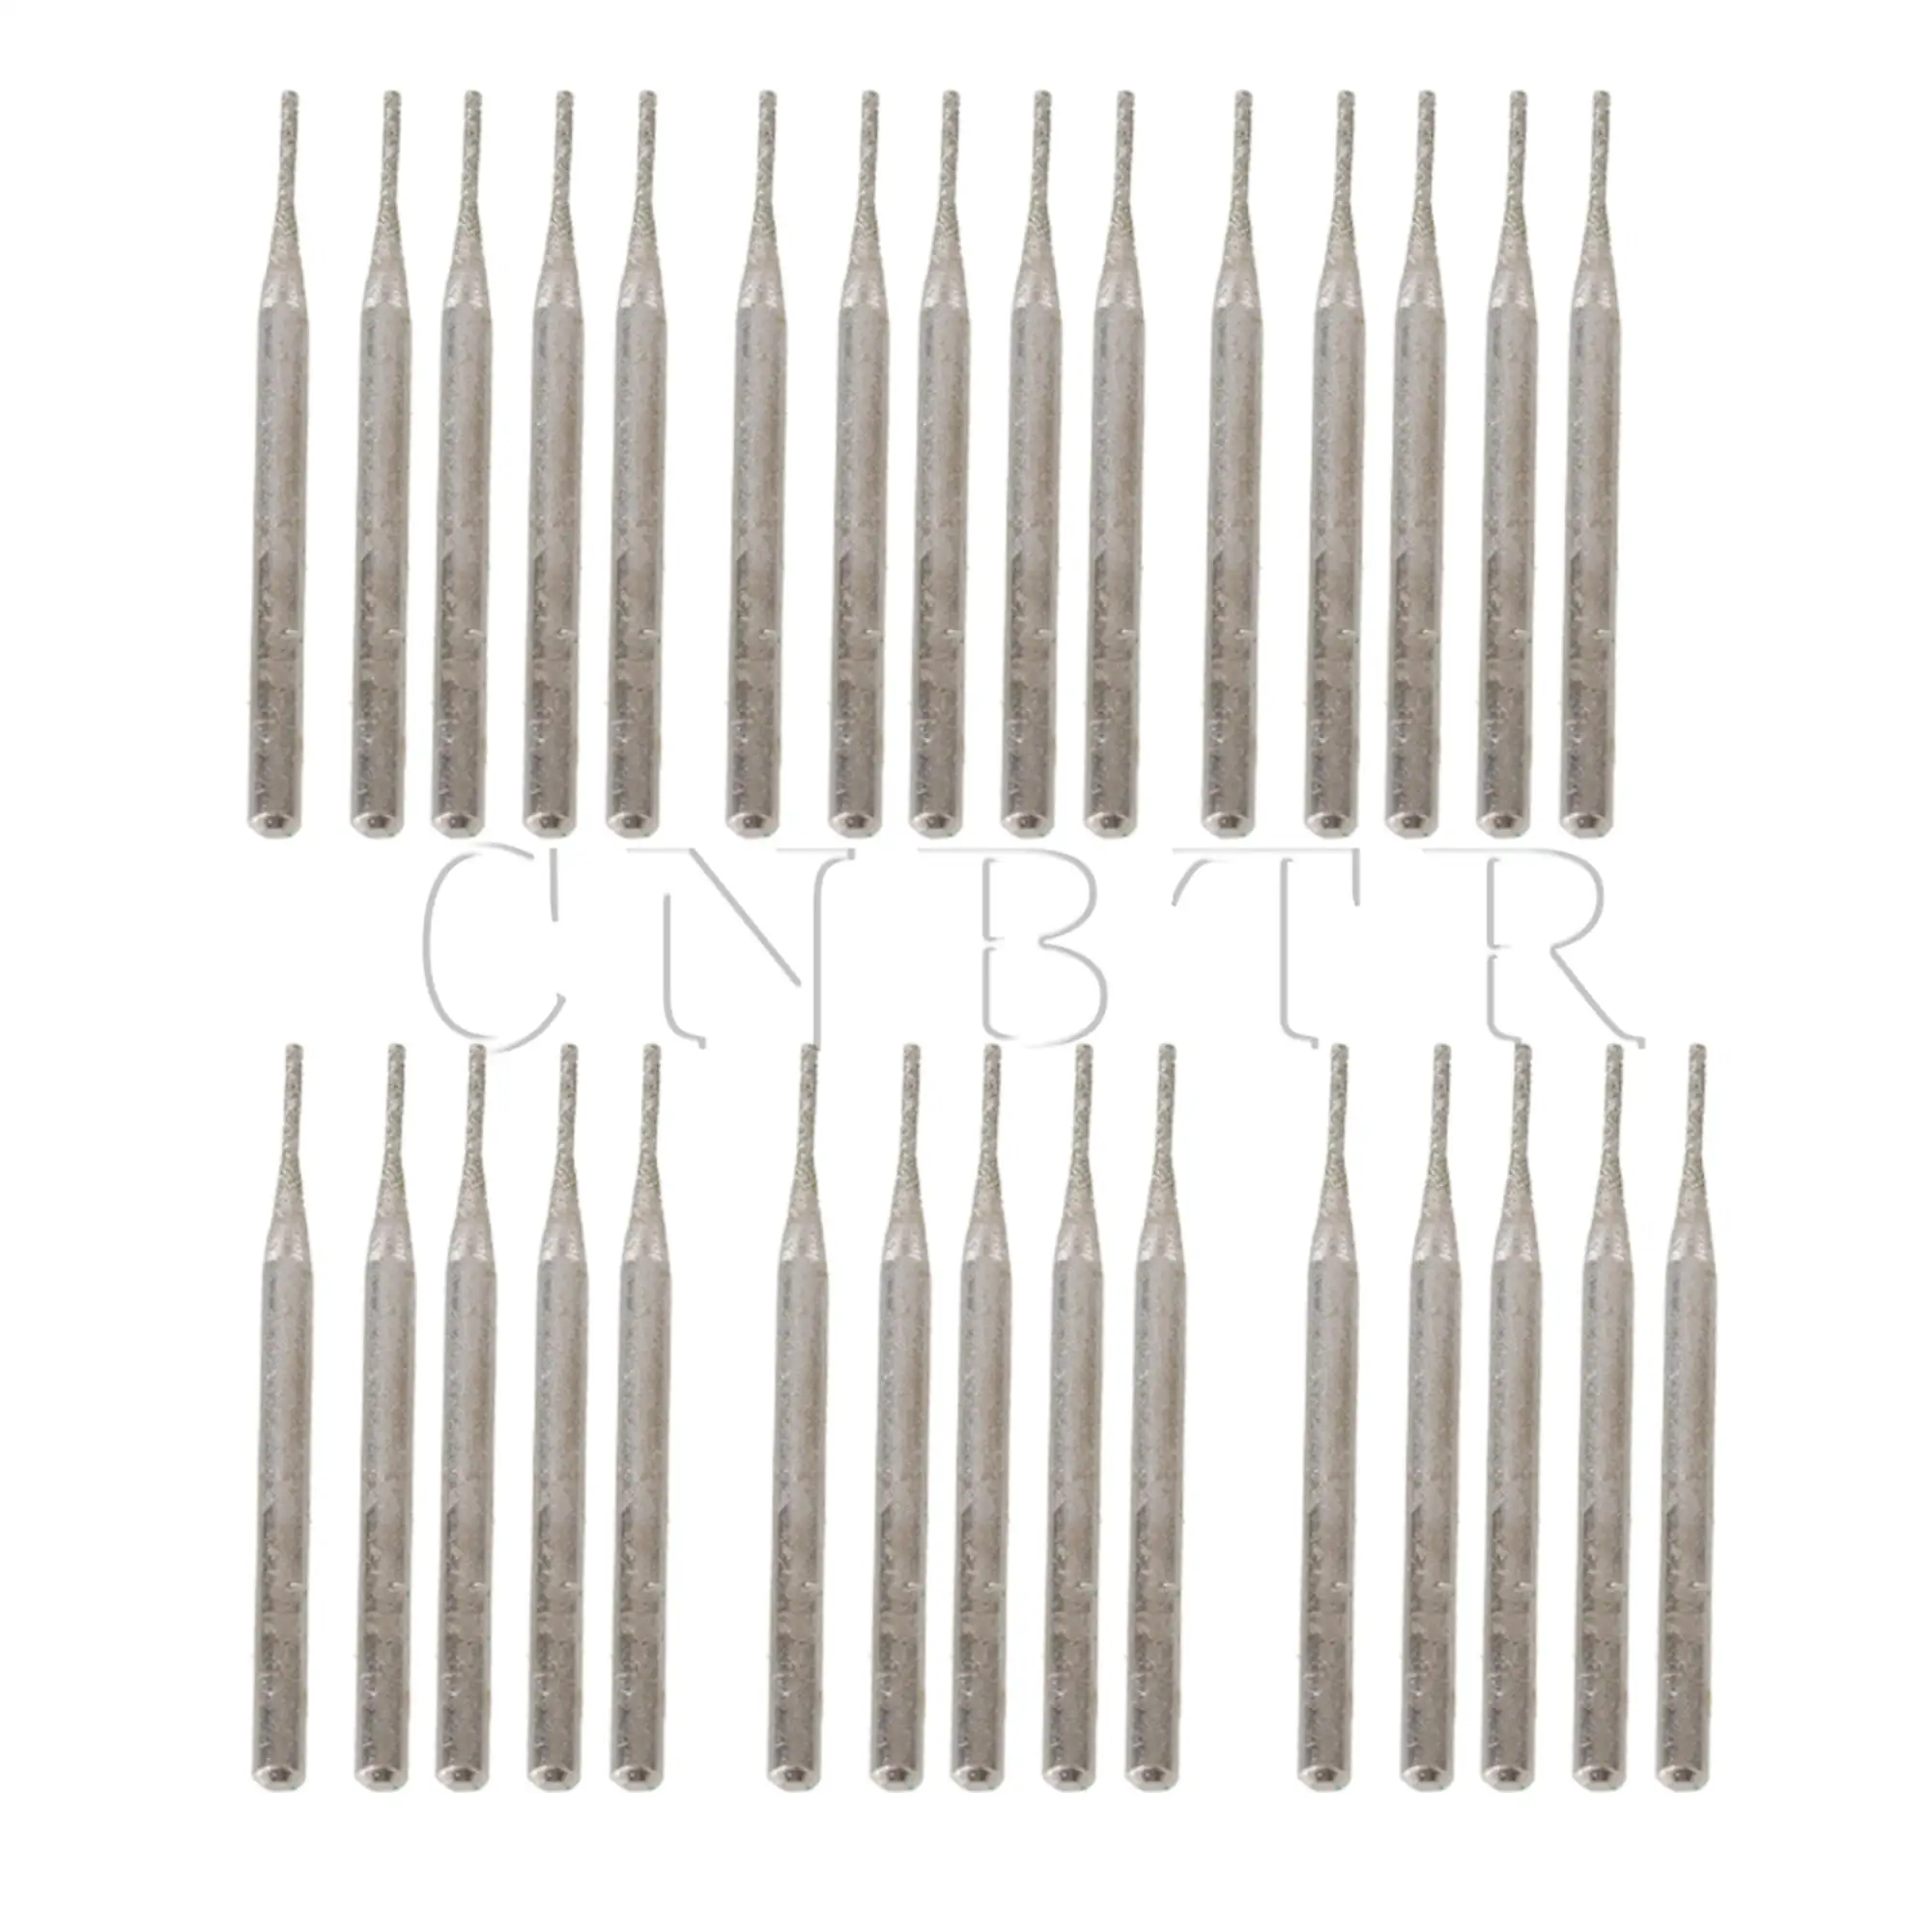 

CNBTR 300pcs Diamond Burr Bits Drill Engraving Carving Rotary Tool 1mm Cylindrial Point